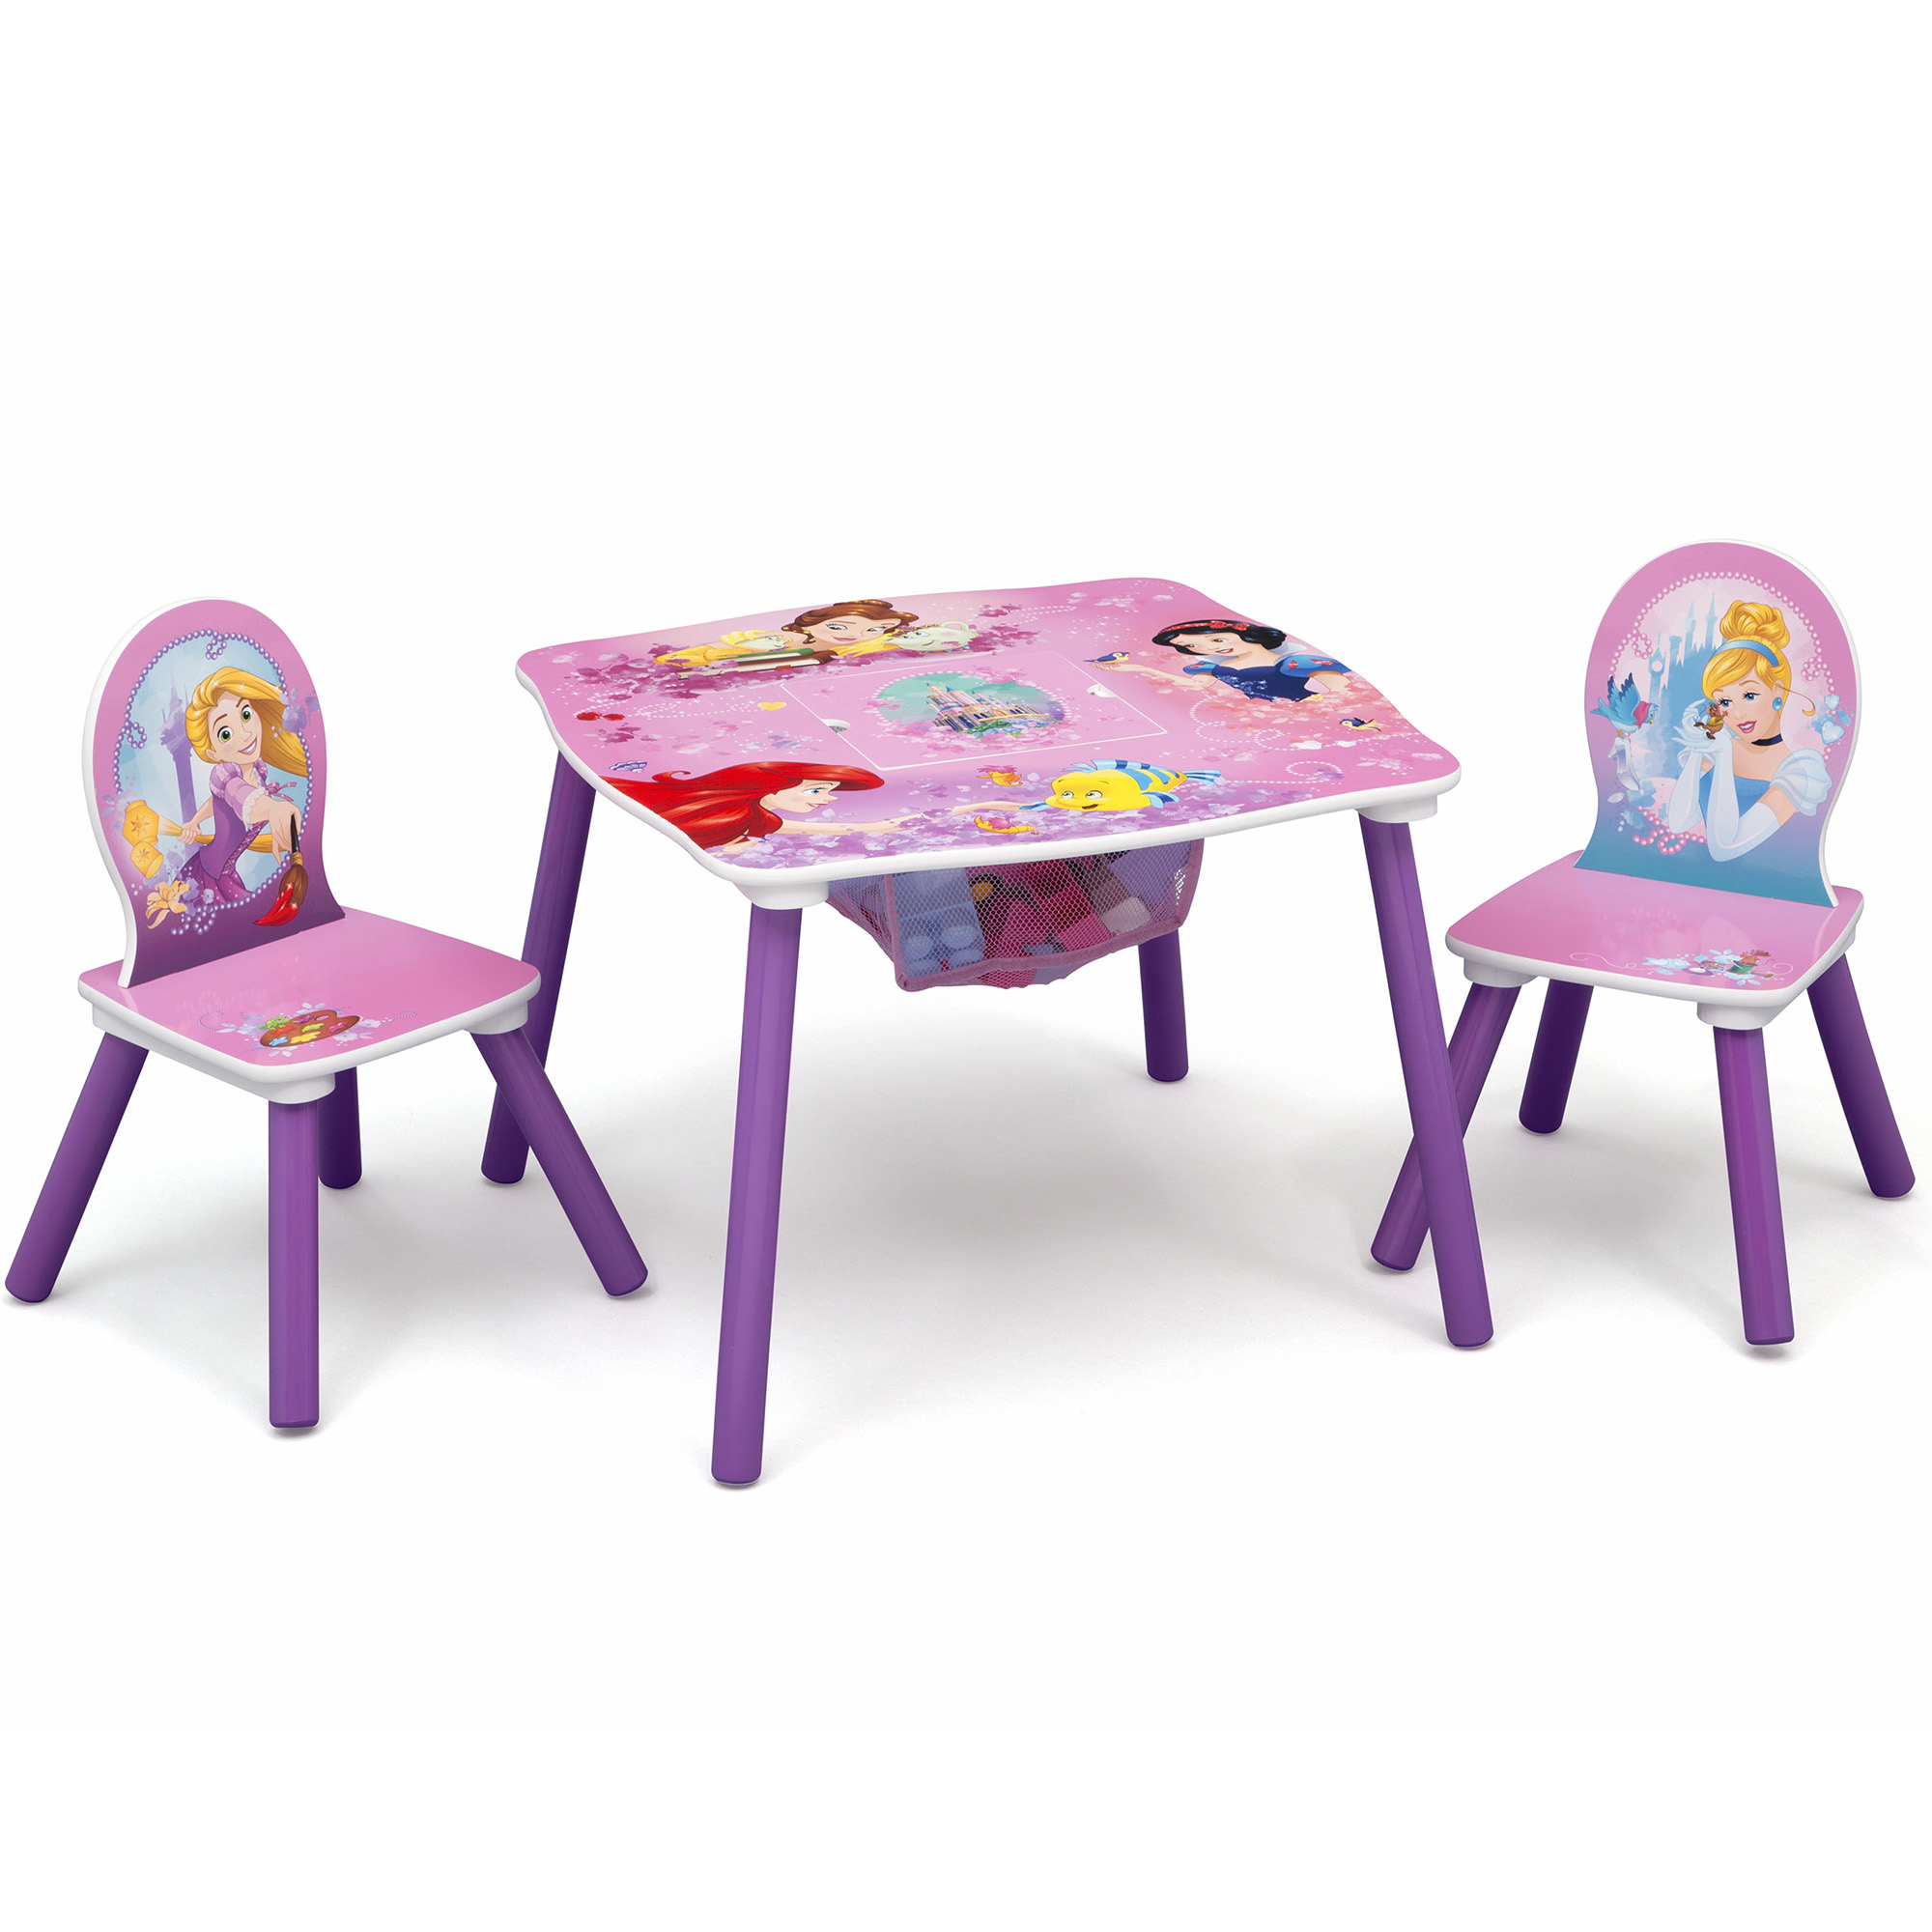 Delta Children Disney Princess Wood Kids Table and Chair Set with Storage